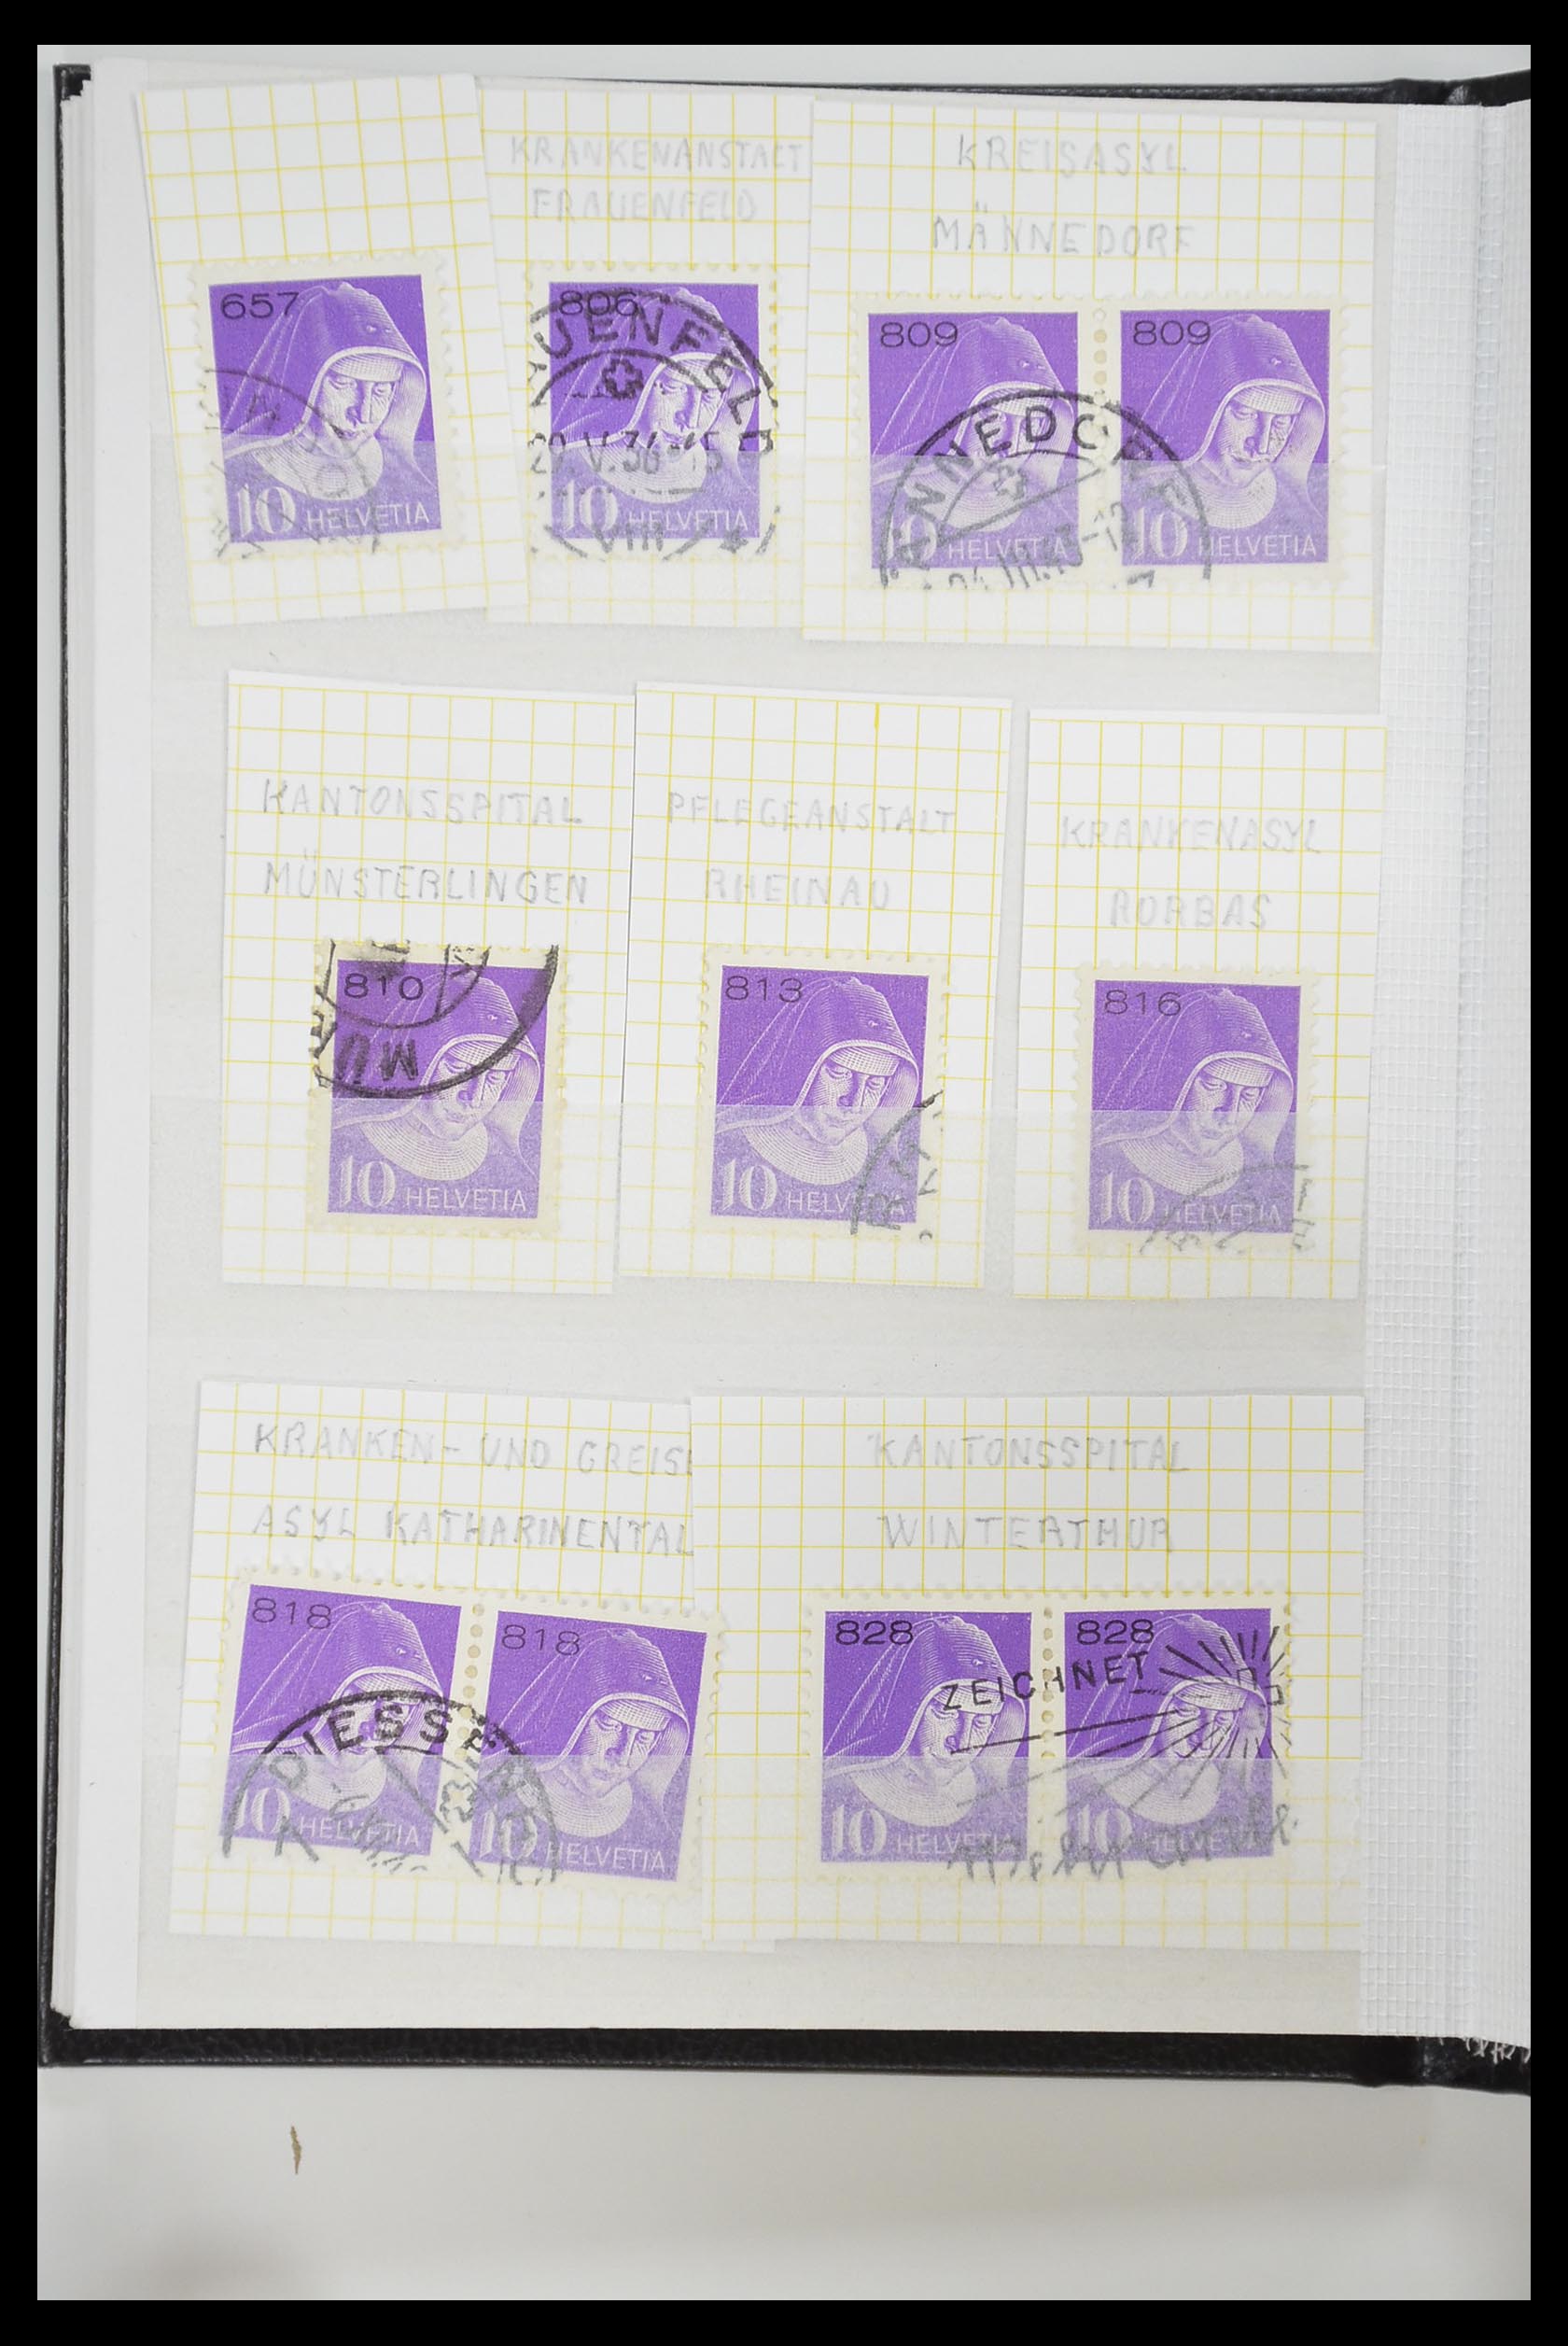 33284 065 - Stamp collection 33284 Switzerland better issues 1900-1995.